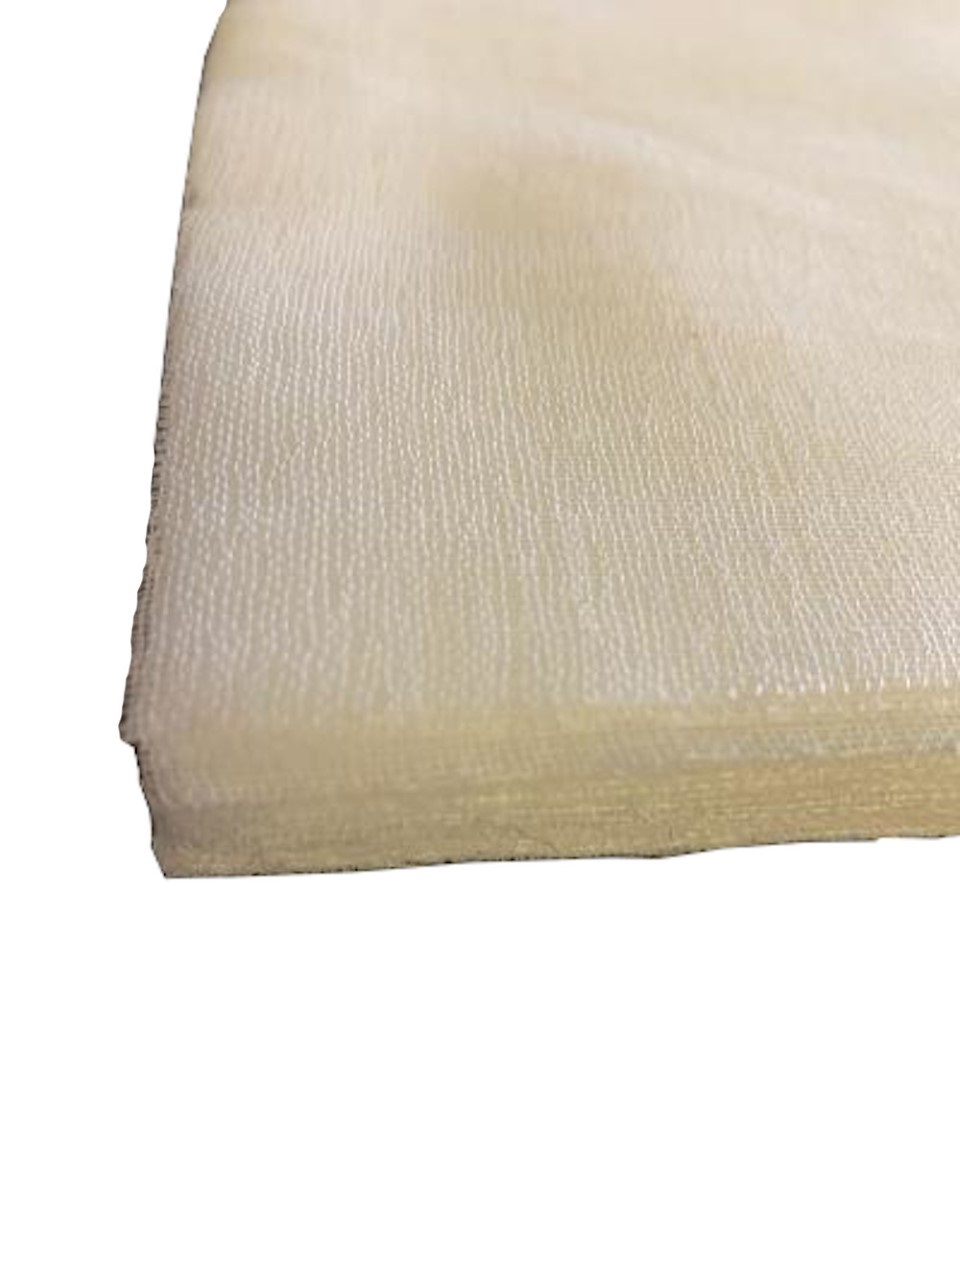 24" x 24" Grade 90 Cheesecloth Bleached Squares 100 Pk